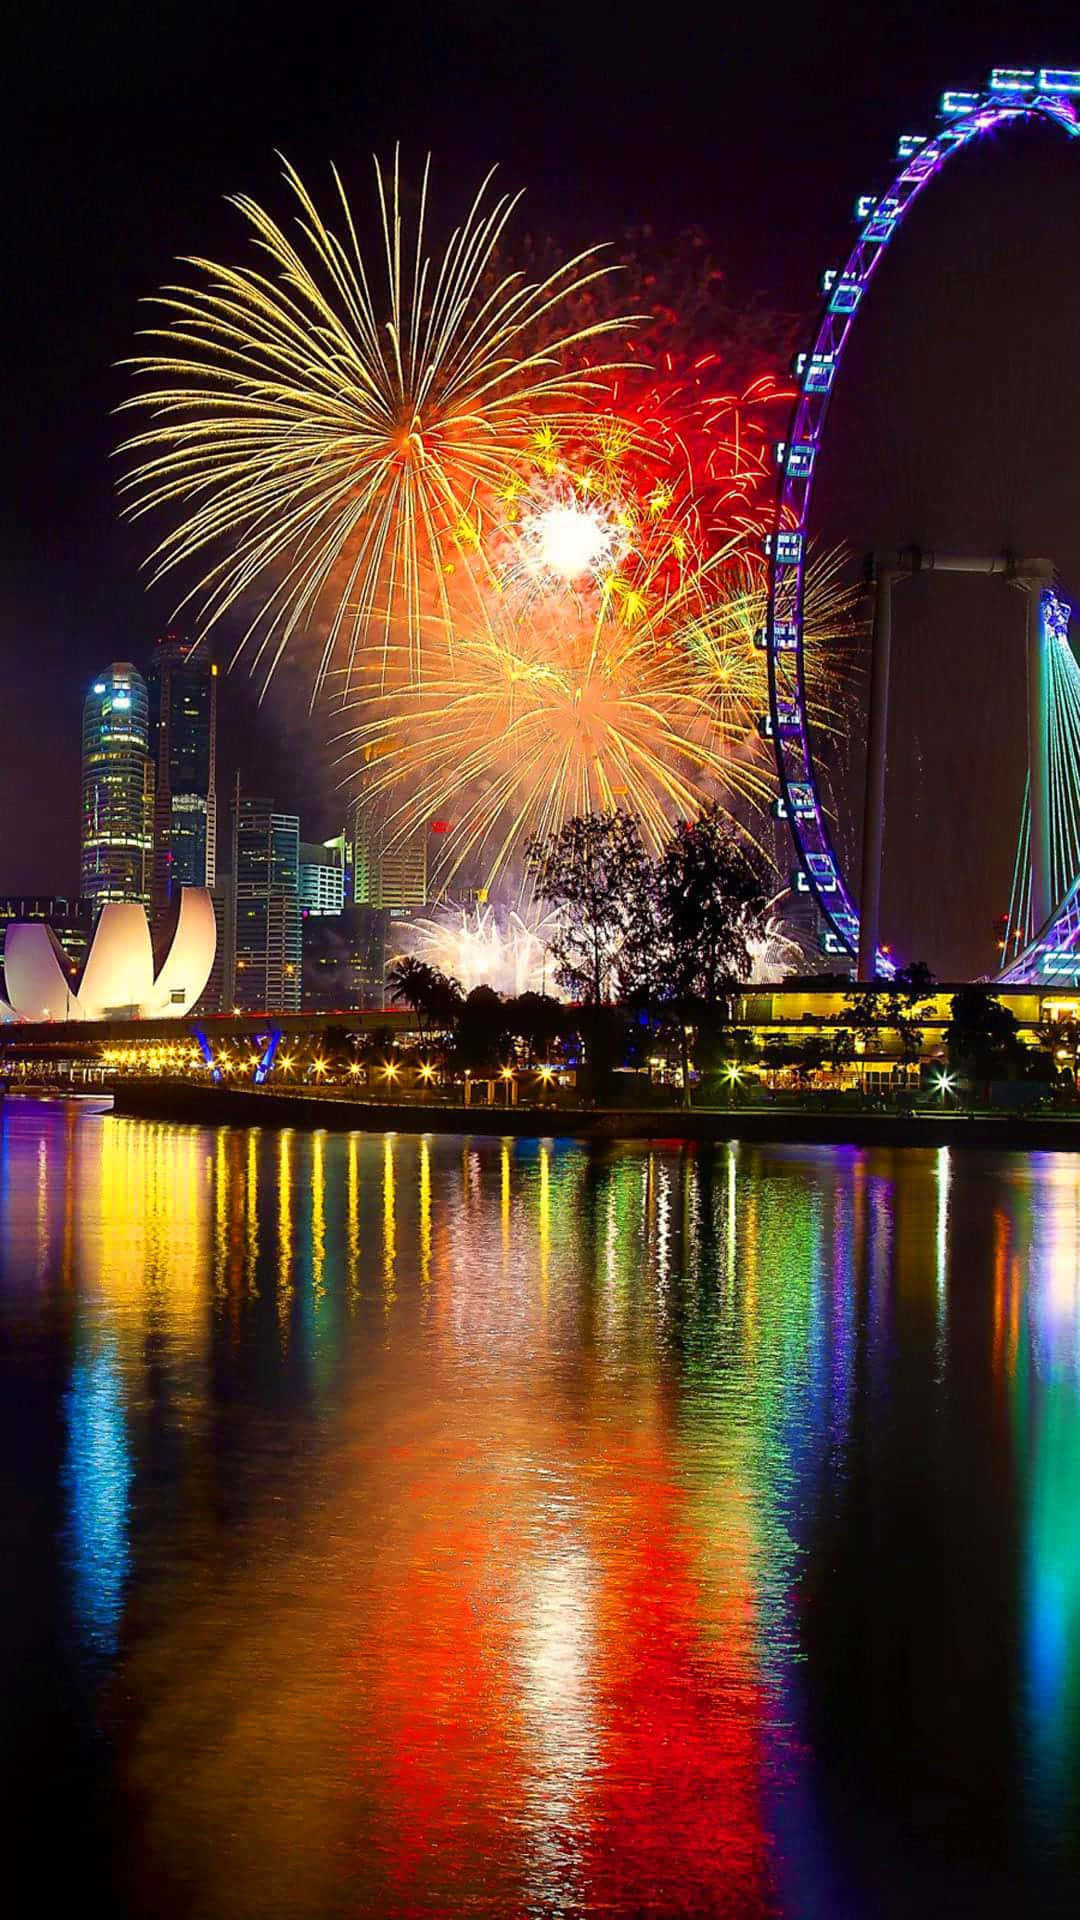 Fireworks Display In City Water Reflection Wallpaper